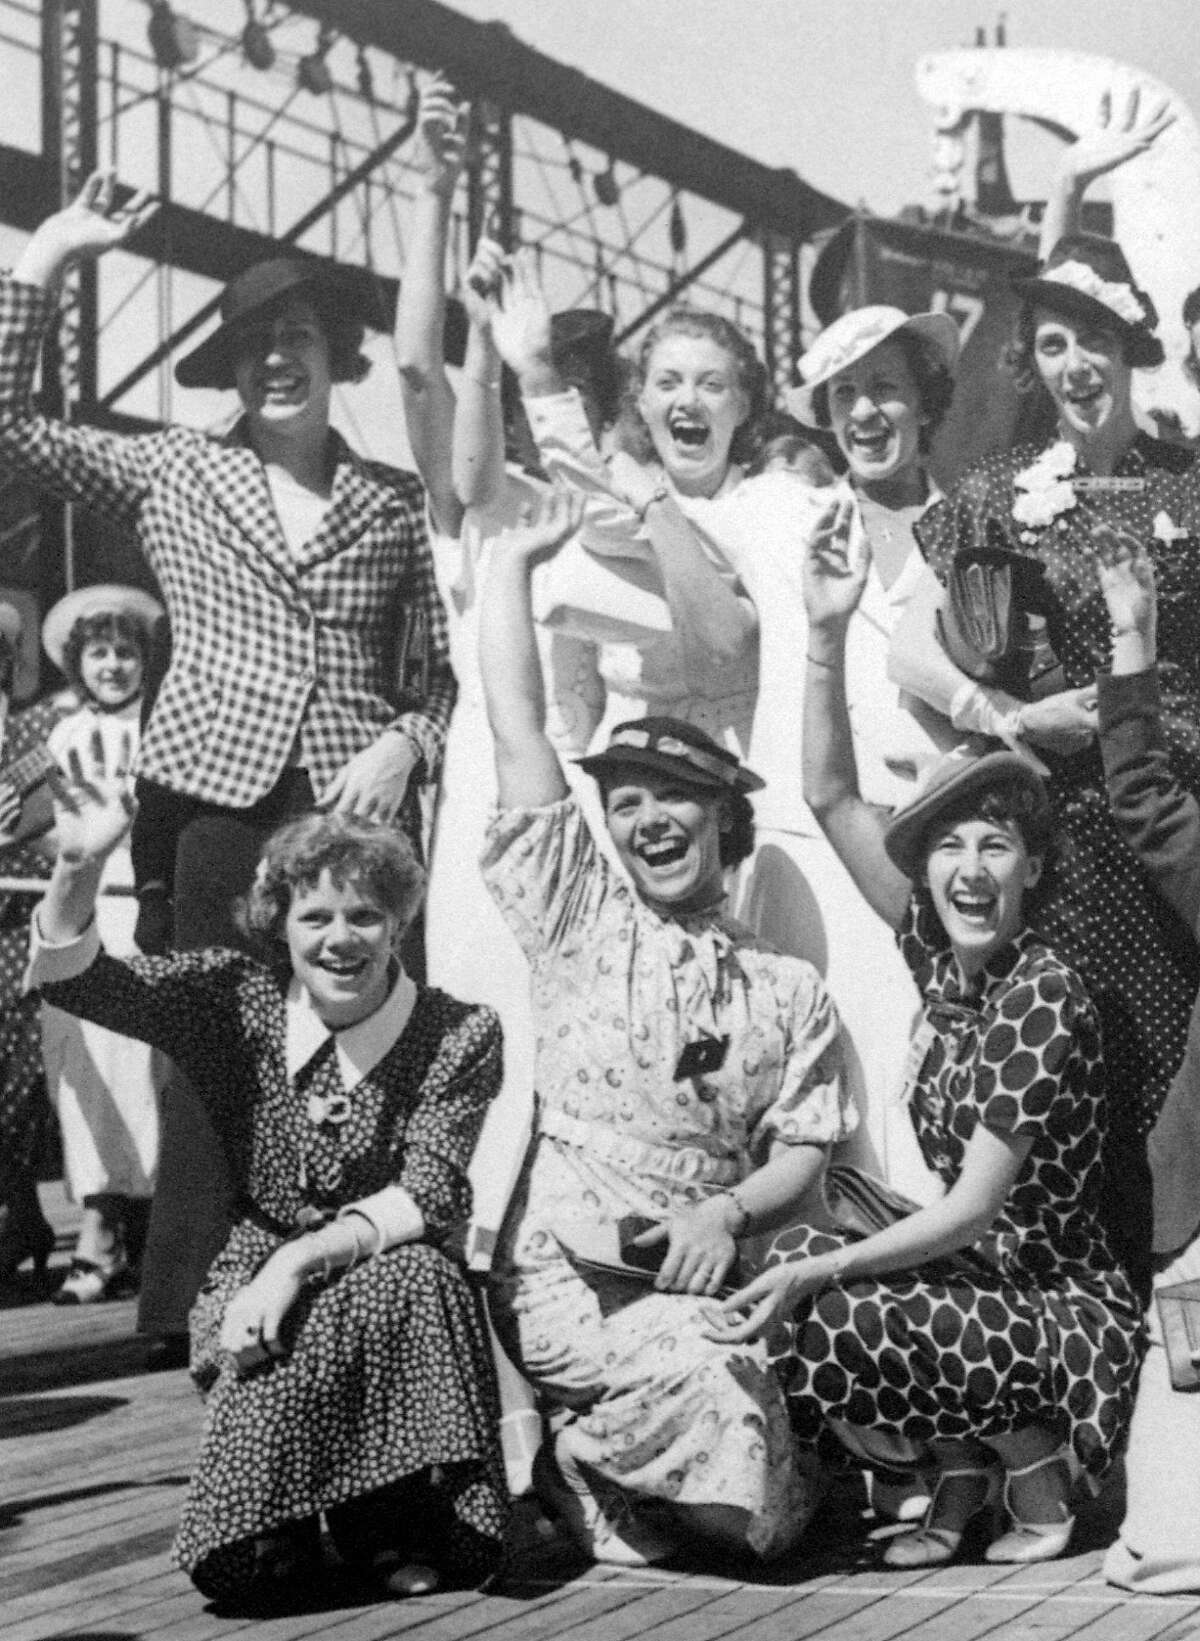 In this July 15, 1936, file photo, Simone Schaller, lower right, waves with members of the United States women's Olympic track and field team as they depart for Europe on the SS Manhattan. Schaller, an American hurdler who competed at the 1932 and 1936 Summer Games and was believed to be the oldest living Olympian, died of natural causes Thursday, Oct. 20, 2016, in the Arcadia, Calif., home she and her husband built when they married in the 1930s, her grandson Jeffrey Hardy said, Saturday, Oct. 22, 2016. She was 104. (AP Photo/File)